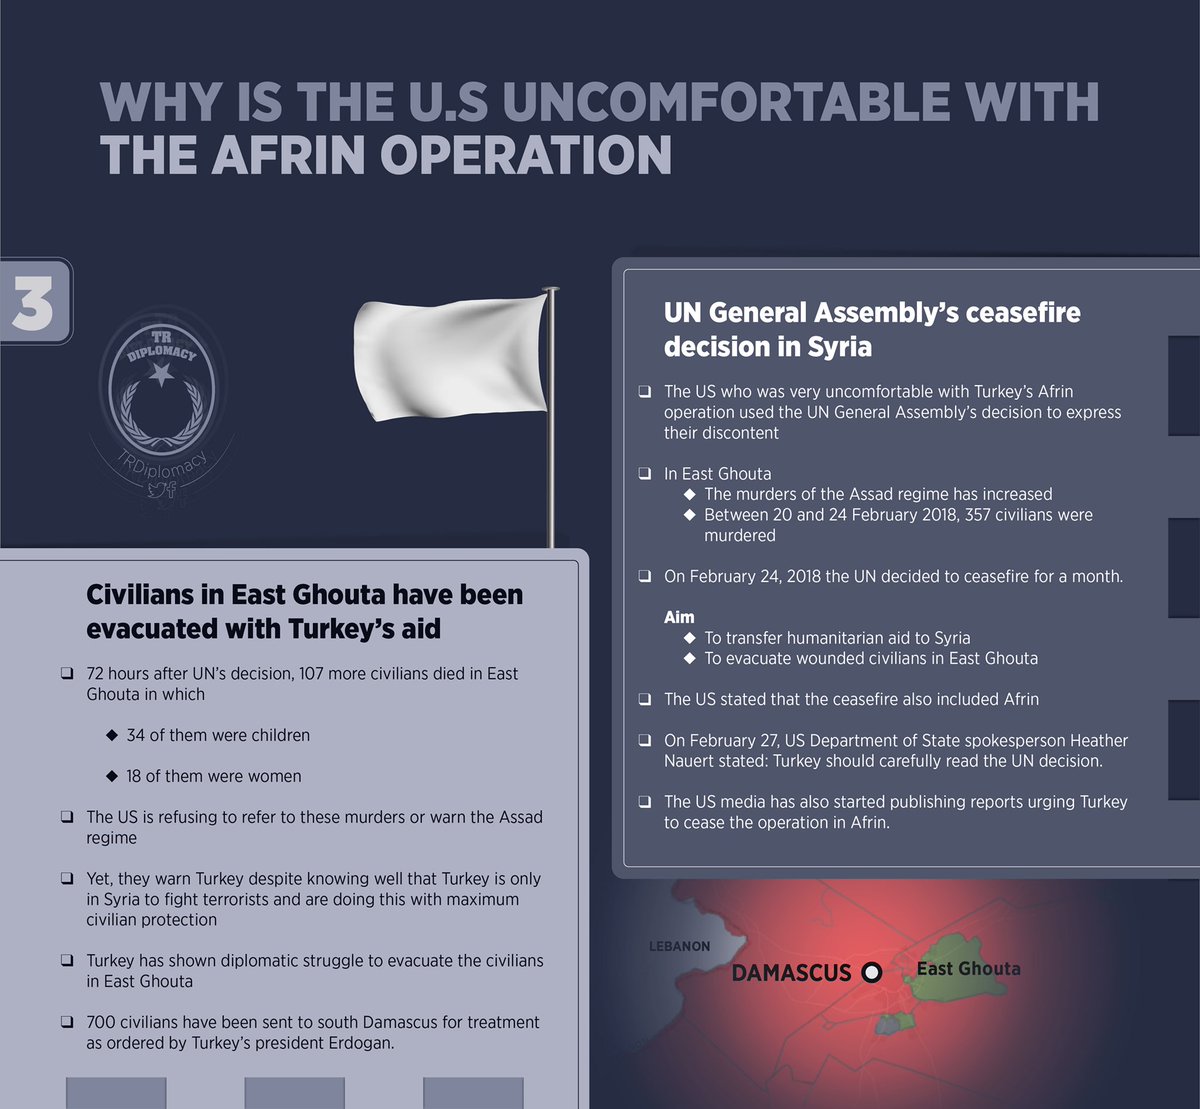 Why is the U.S uncomfortable with the Afrin Operation?